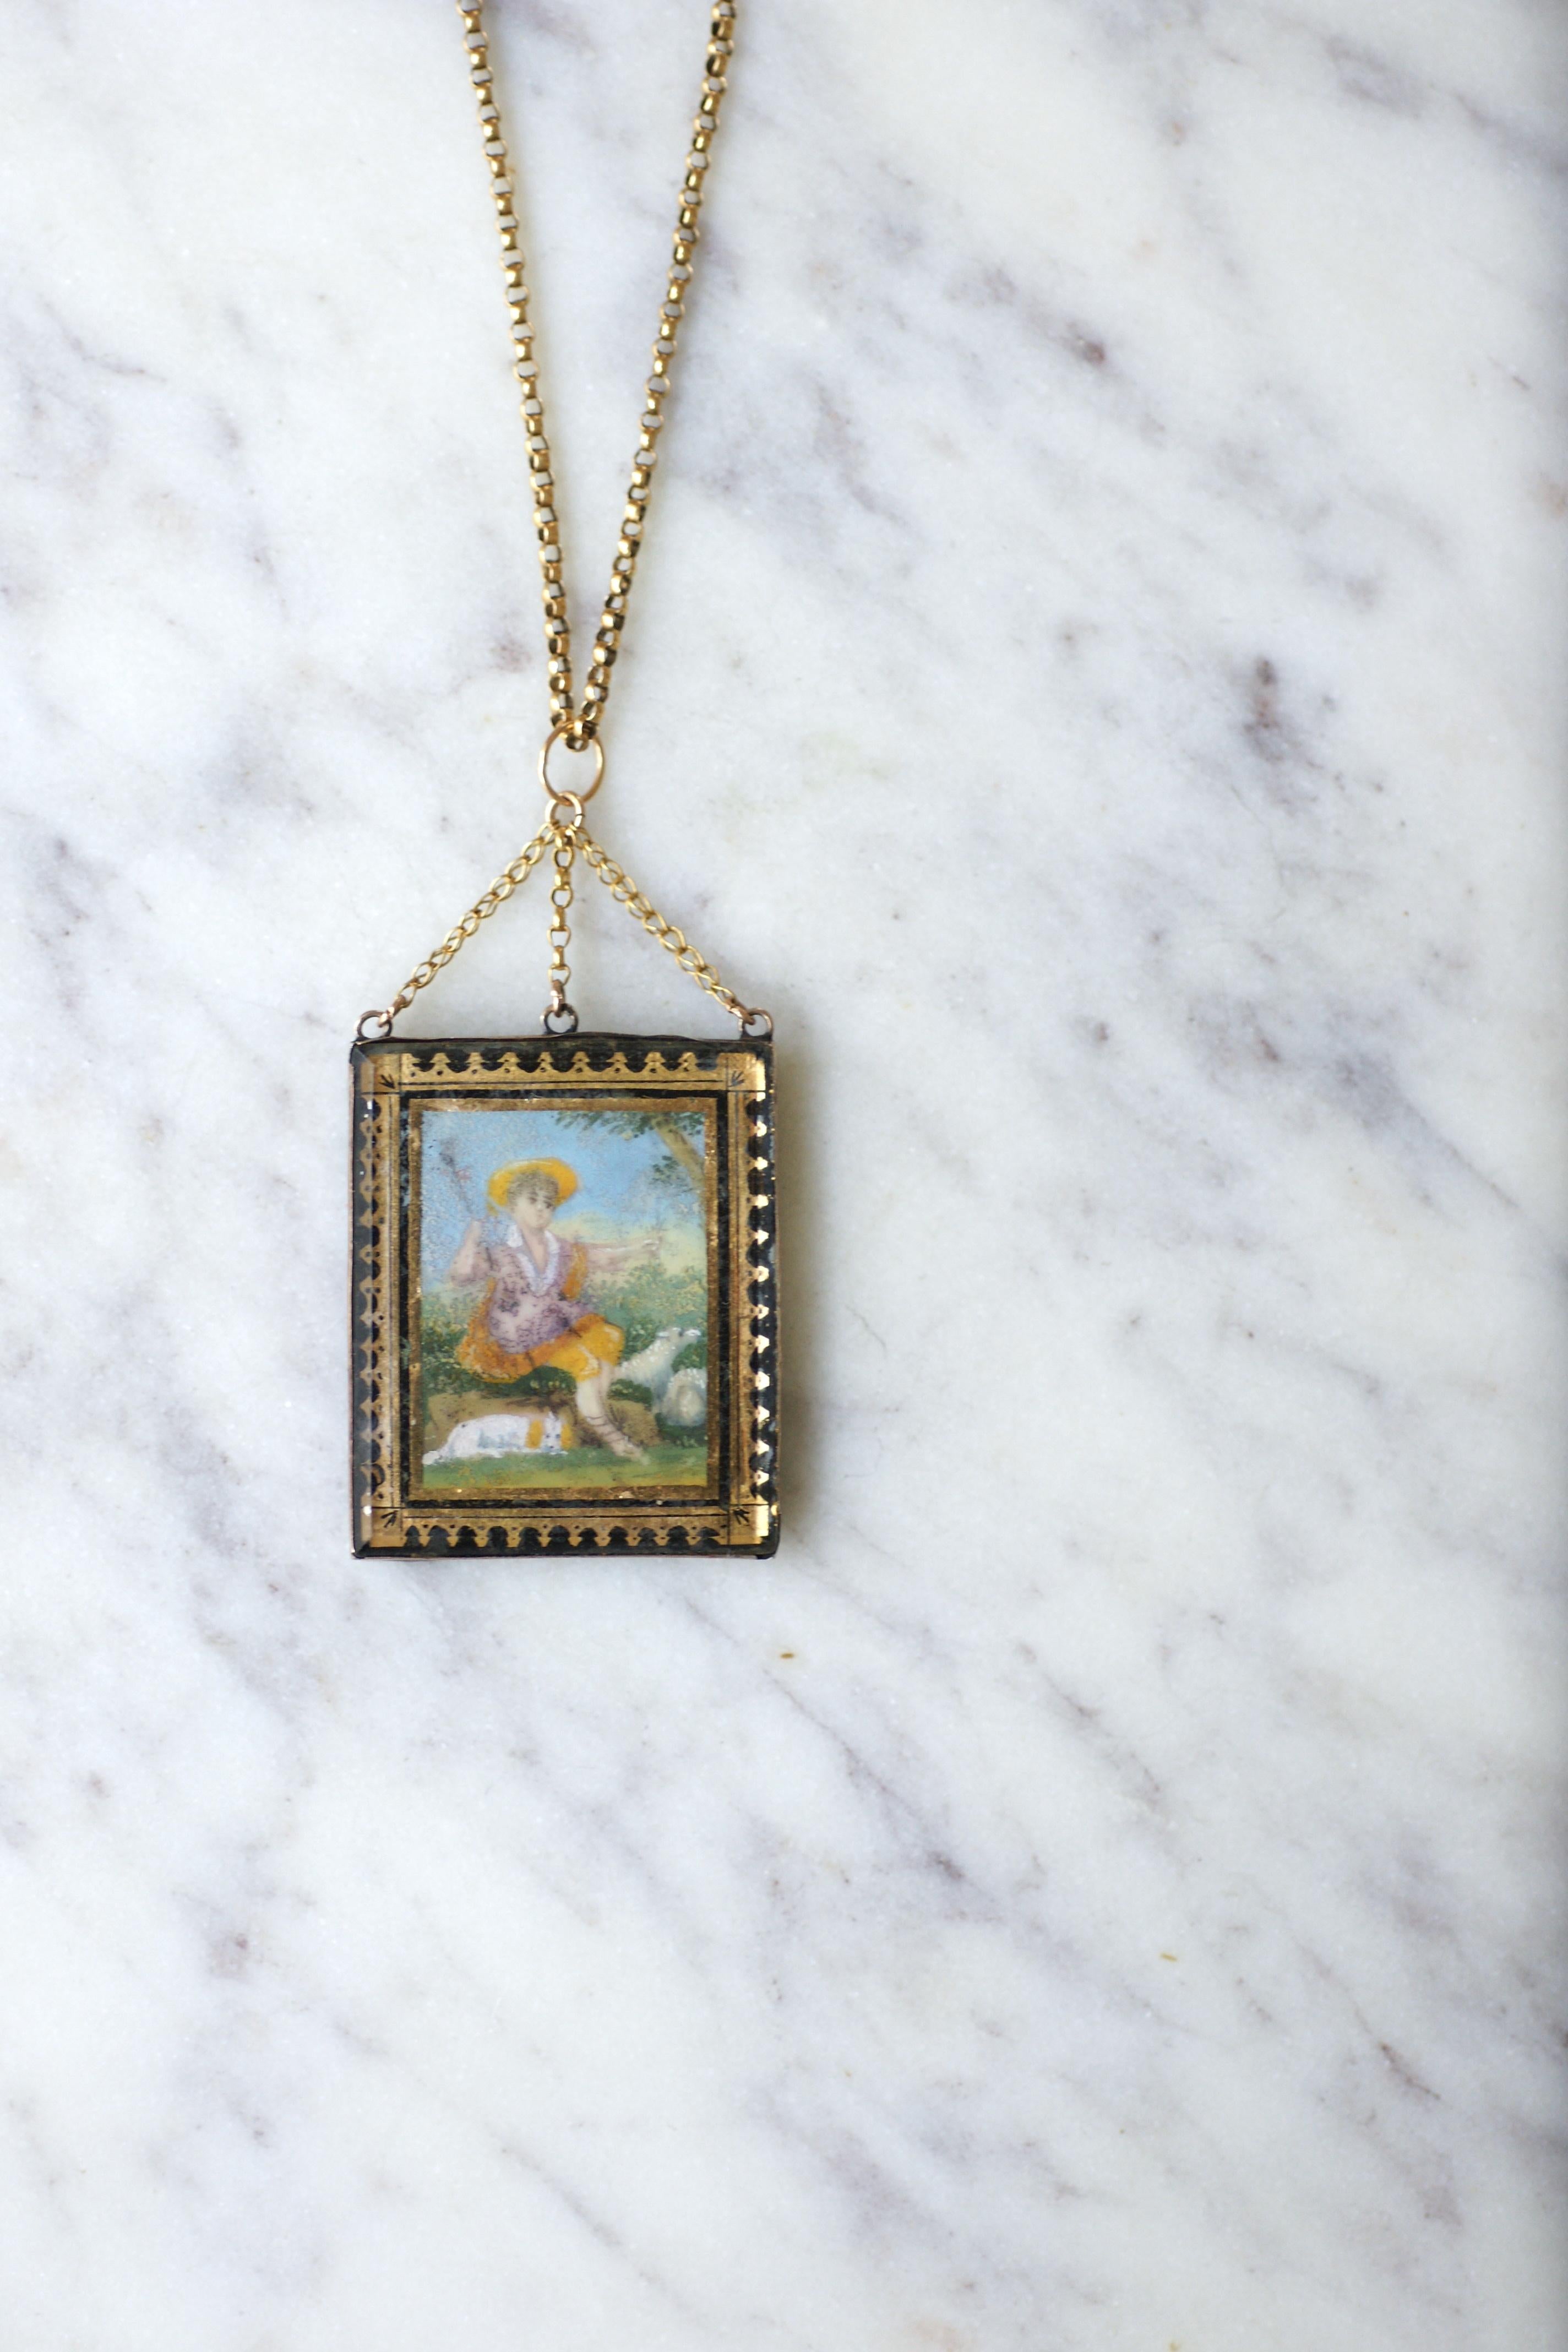 18kt yellow gold chain adorned with a locket clasp and holding a 18kt rose gold (hallmark: rooster) ‘verre eglomisé’ locket.

The face is showing a 18th Century style shepherd miniature. Back is foiled with a square fabric.

'Verre églomisé' is a